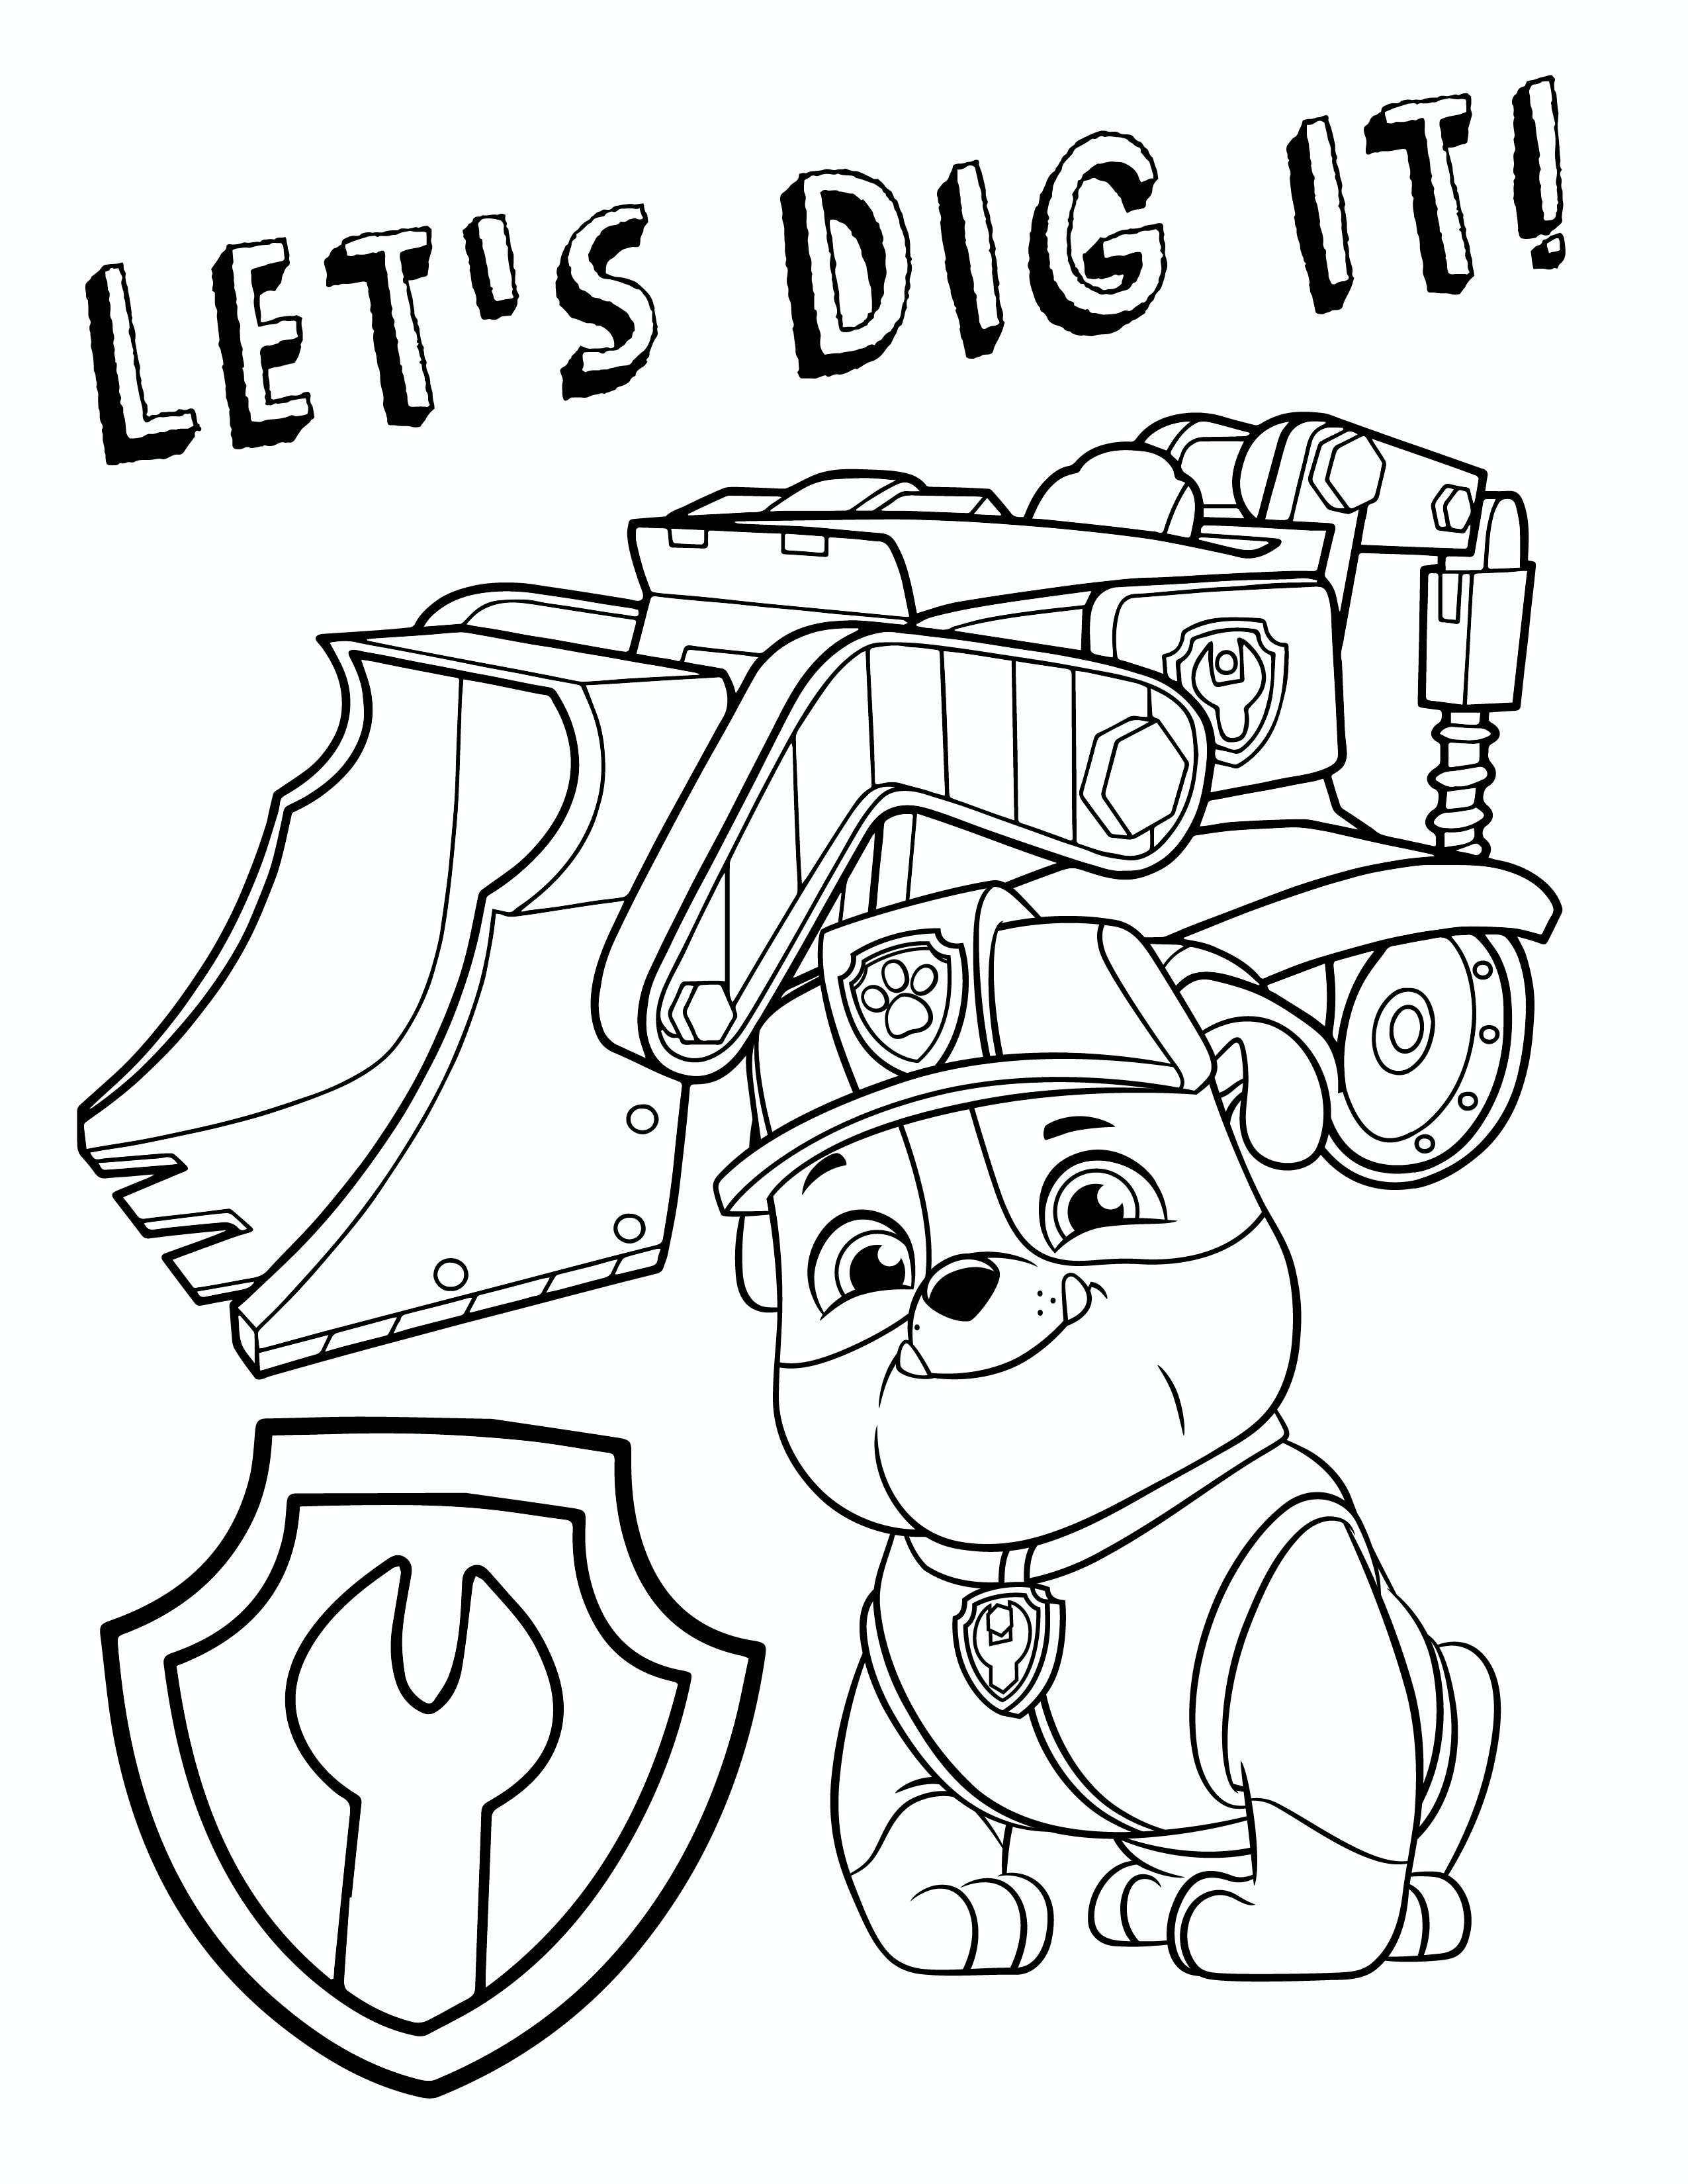 Paw Patrol Chase Car Coloring Pages canvasvalley